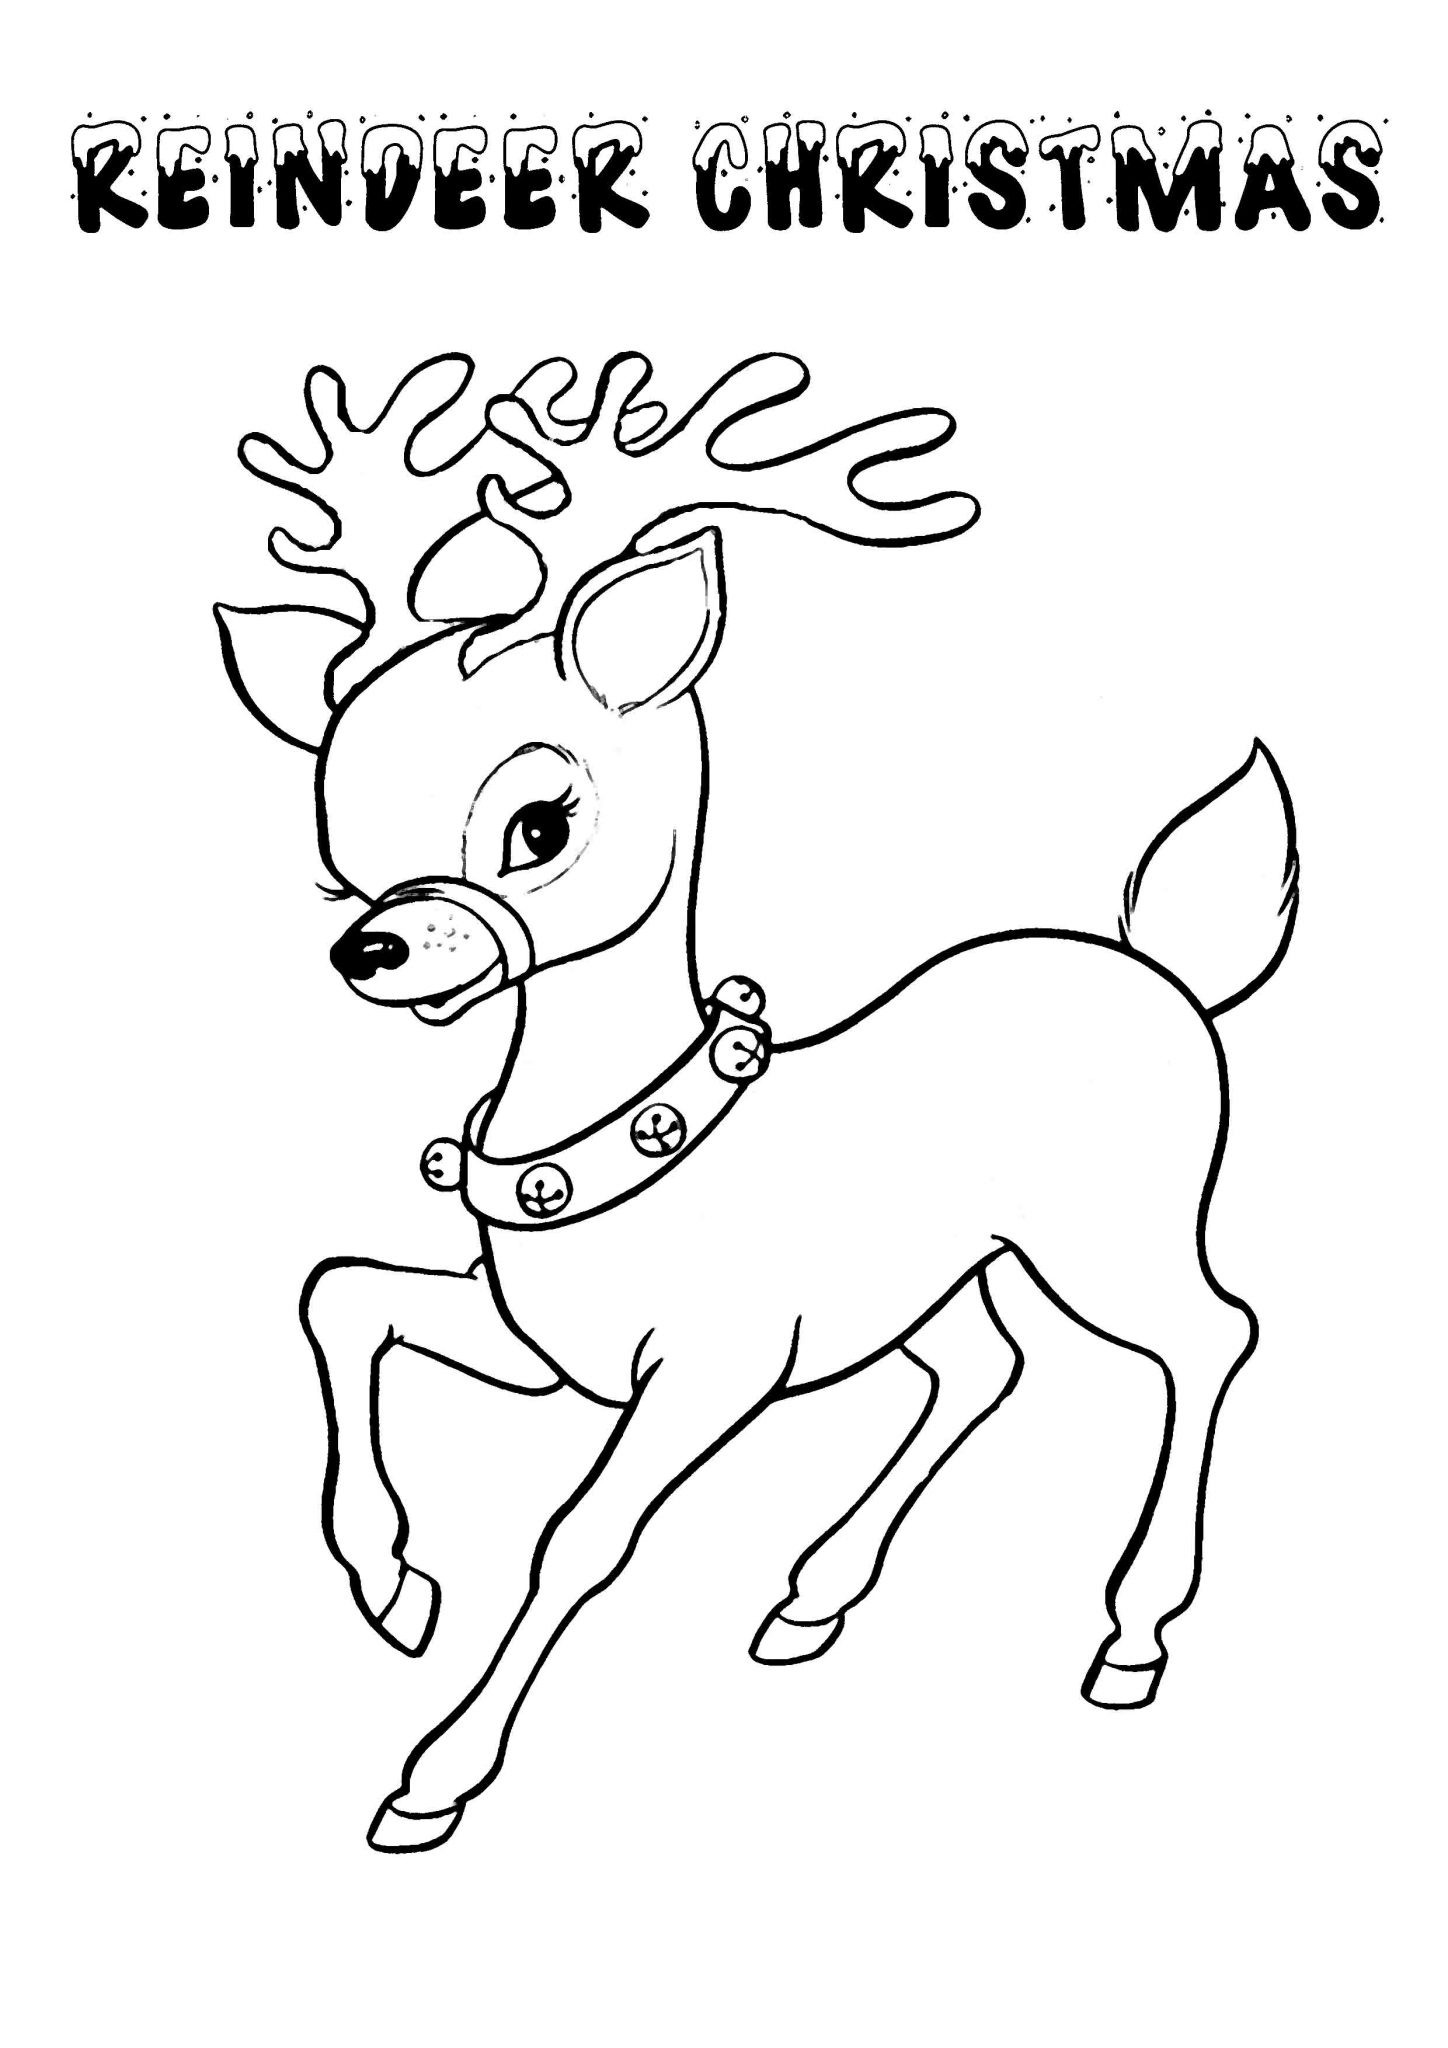 Printable Holiday Coloring Pages
 Print & Download Printable Christmas Coloring Pages for Kids